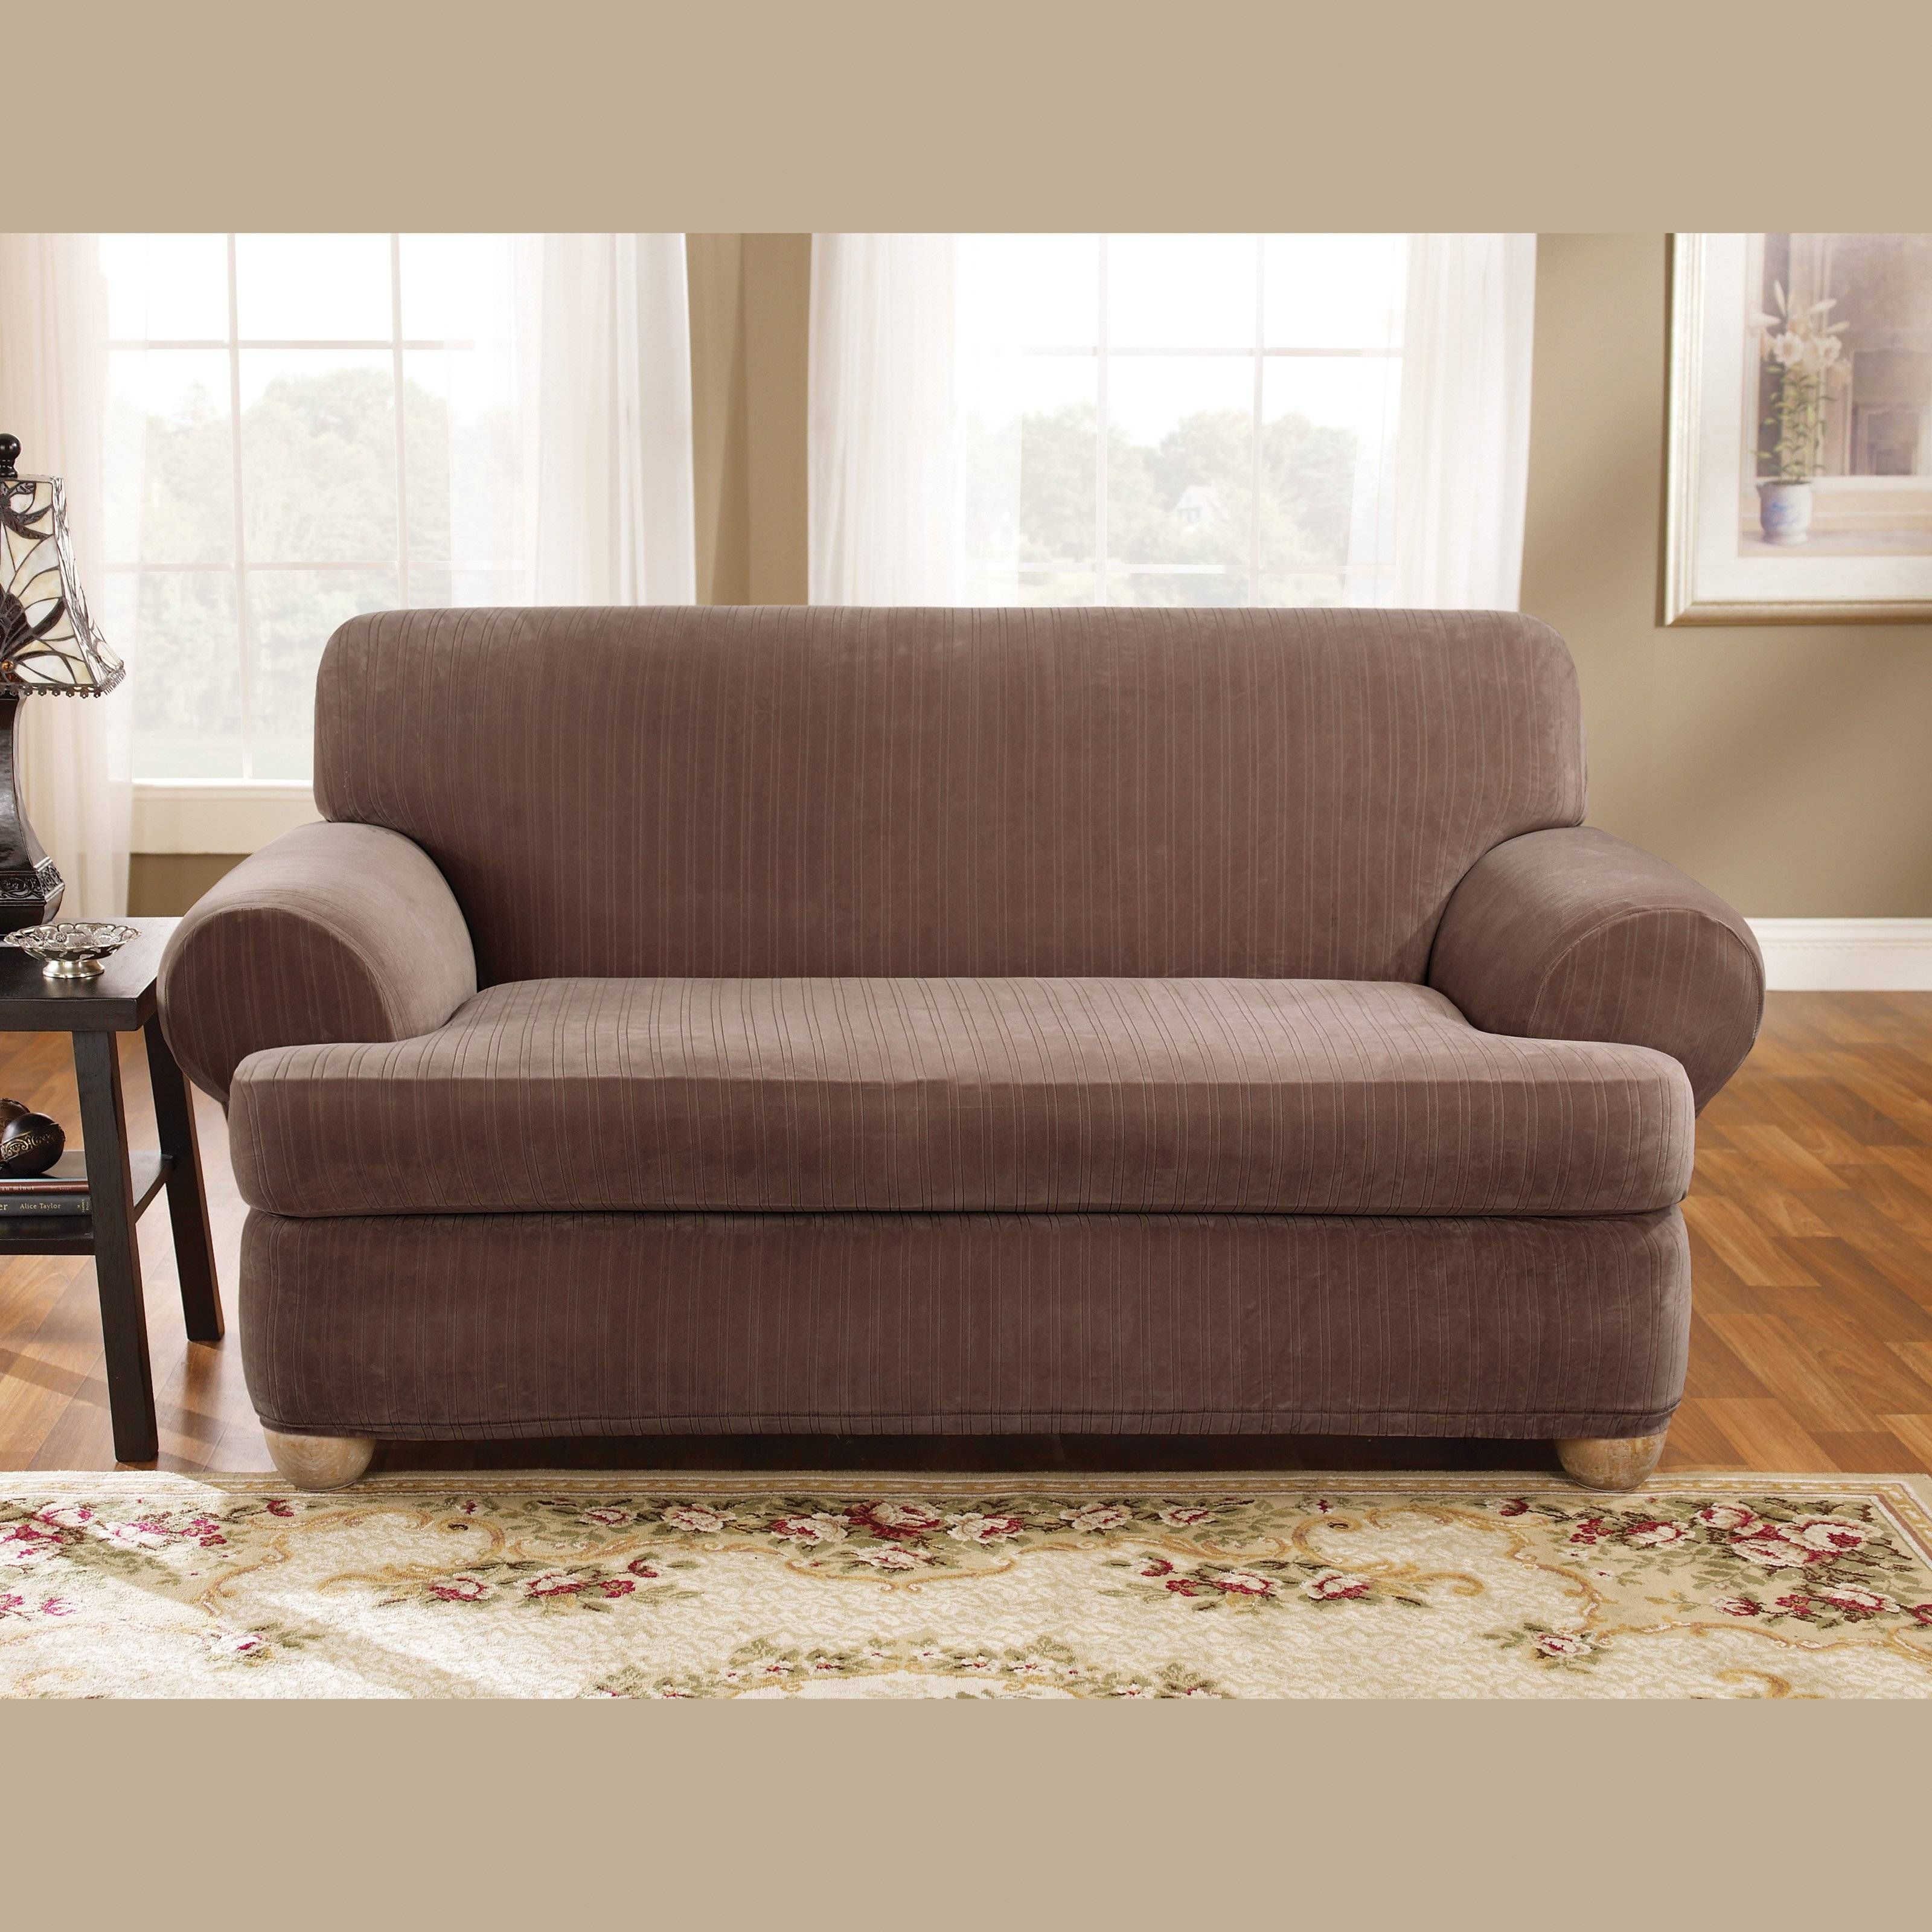 Furniture: Sofas At Target | Stretch Sofa Covers | Sofa Slipcover For 3 Piece Sofa Covers (View 3 of 15)